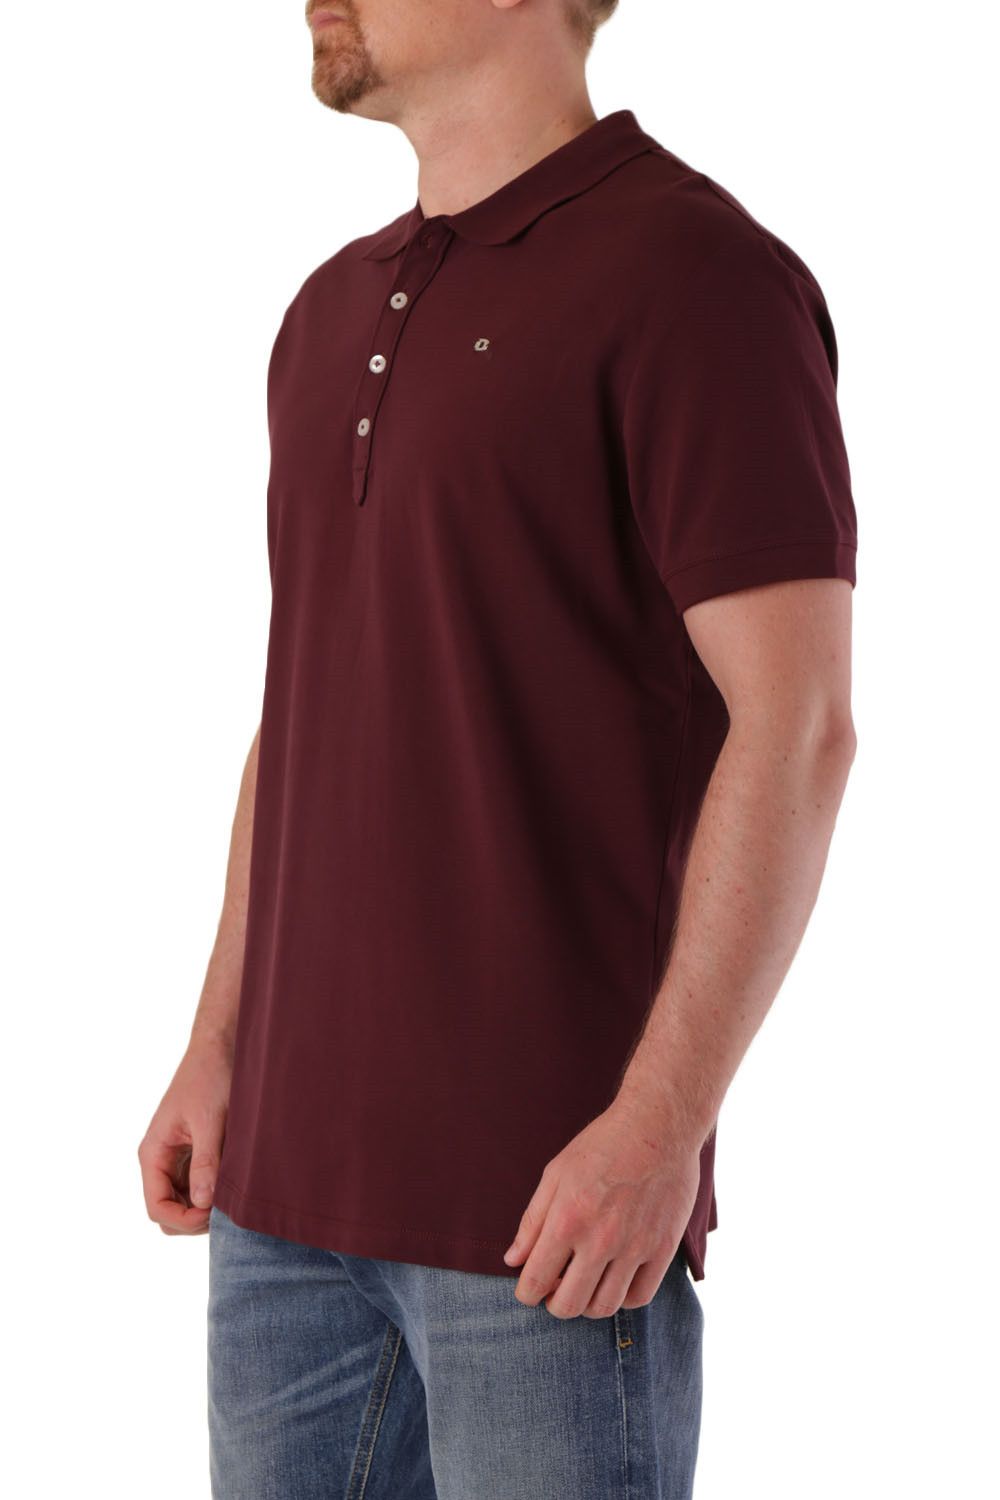 Brand: Diesel Gender: Men Type: Polo Season: Spring/Summer  PRODUCT DETAIL • Color: red • Pattern: plain • Fastening: buttons • Sleeves: short • Collar: classic  COMPOSITION AND MATERIAL • Composition: -95% cotton -5% elastane  •  Washing: machine wash at 30°